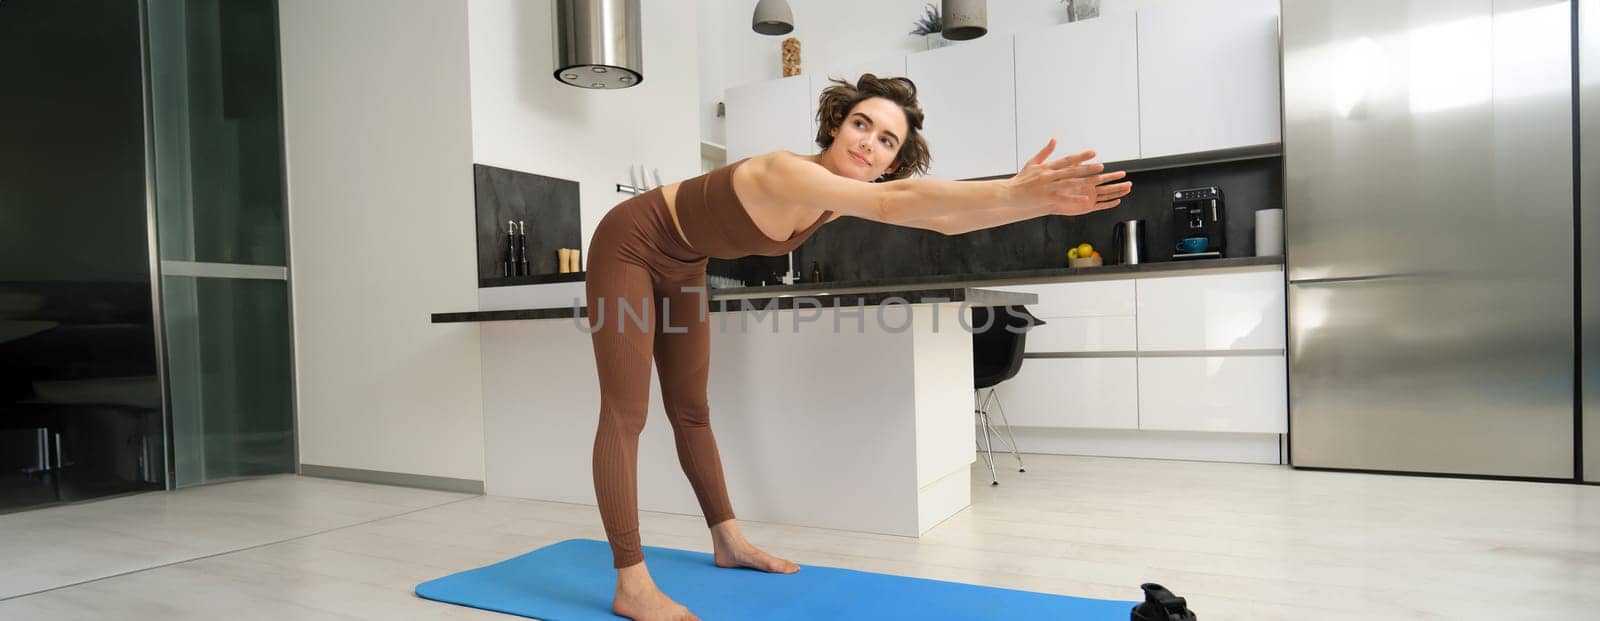 Woman follows gym video tutorial on smartphone while workout at home. Fitness girl does training at home on rubber yoga mat.